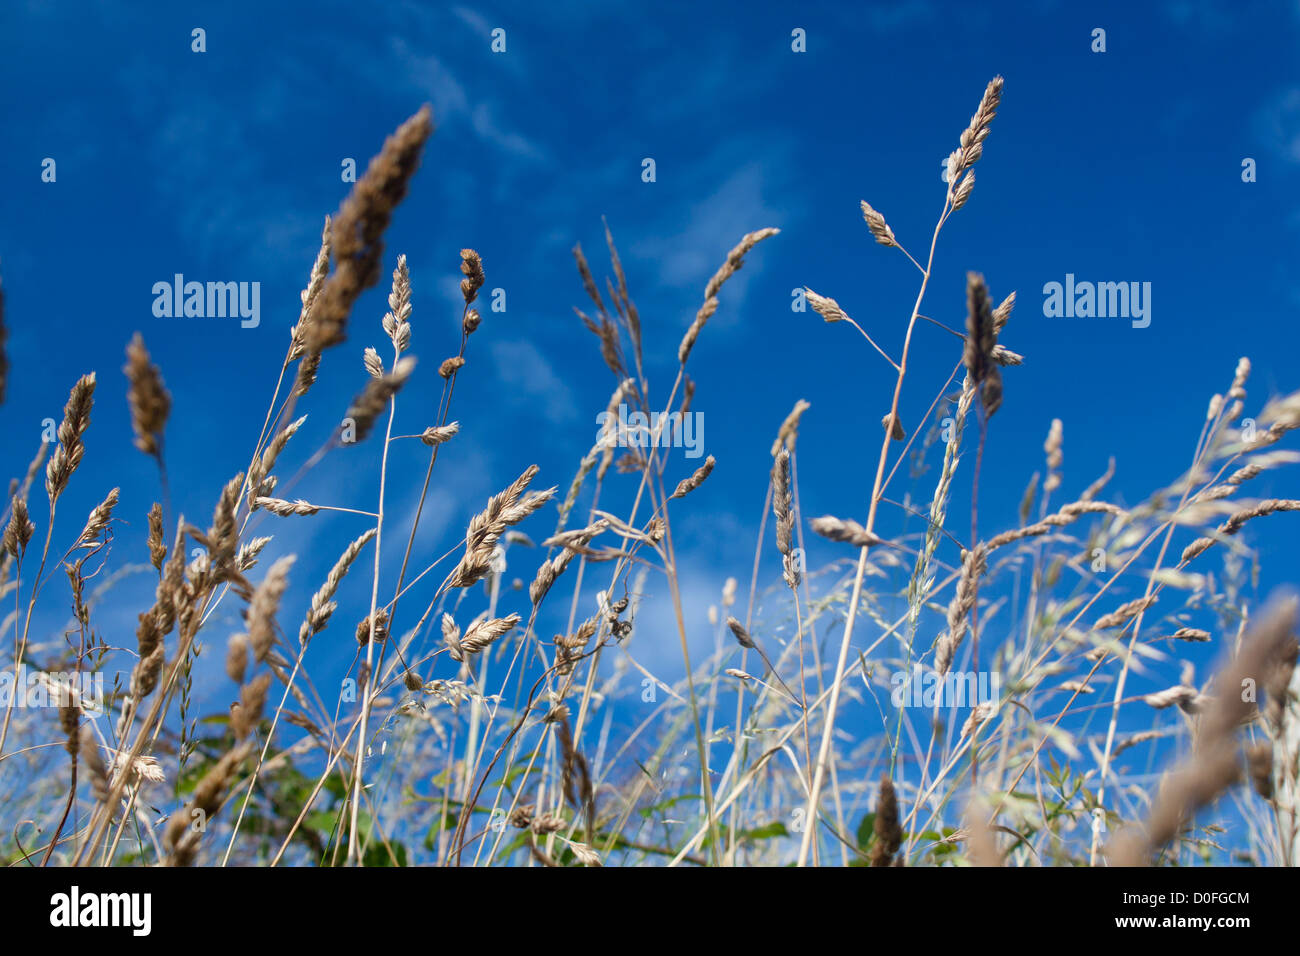 Wild grasses growing by roadside with blue sky in background Pembrokeshire Wales UK Stock Photo